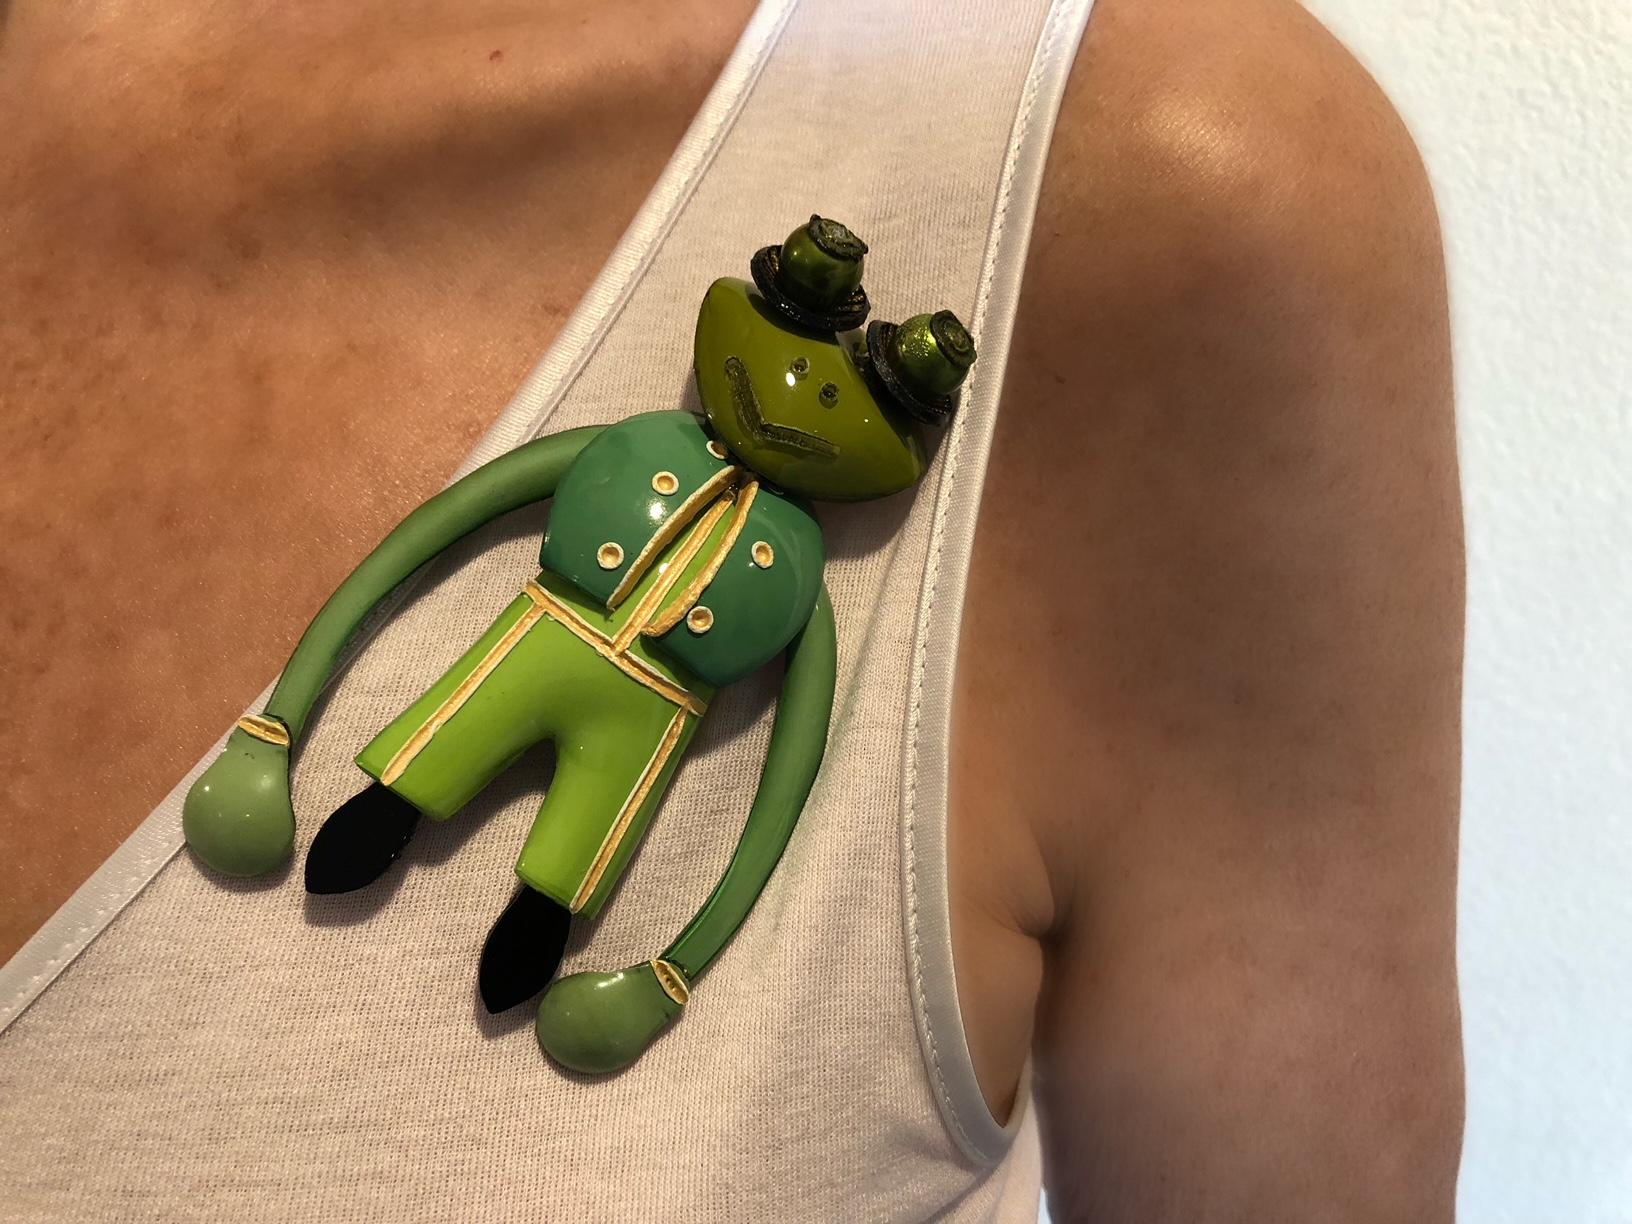 Light and easy to wear, this handmade artisanal brooch/pin was made in Paris by Cilea. The pin is comprised of green enameline (resin and enamel composite) and depicts a frog. Throughout the pin you can see the attention to detail Cilea is known